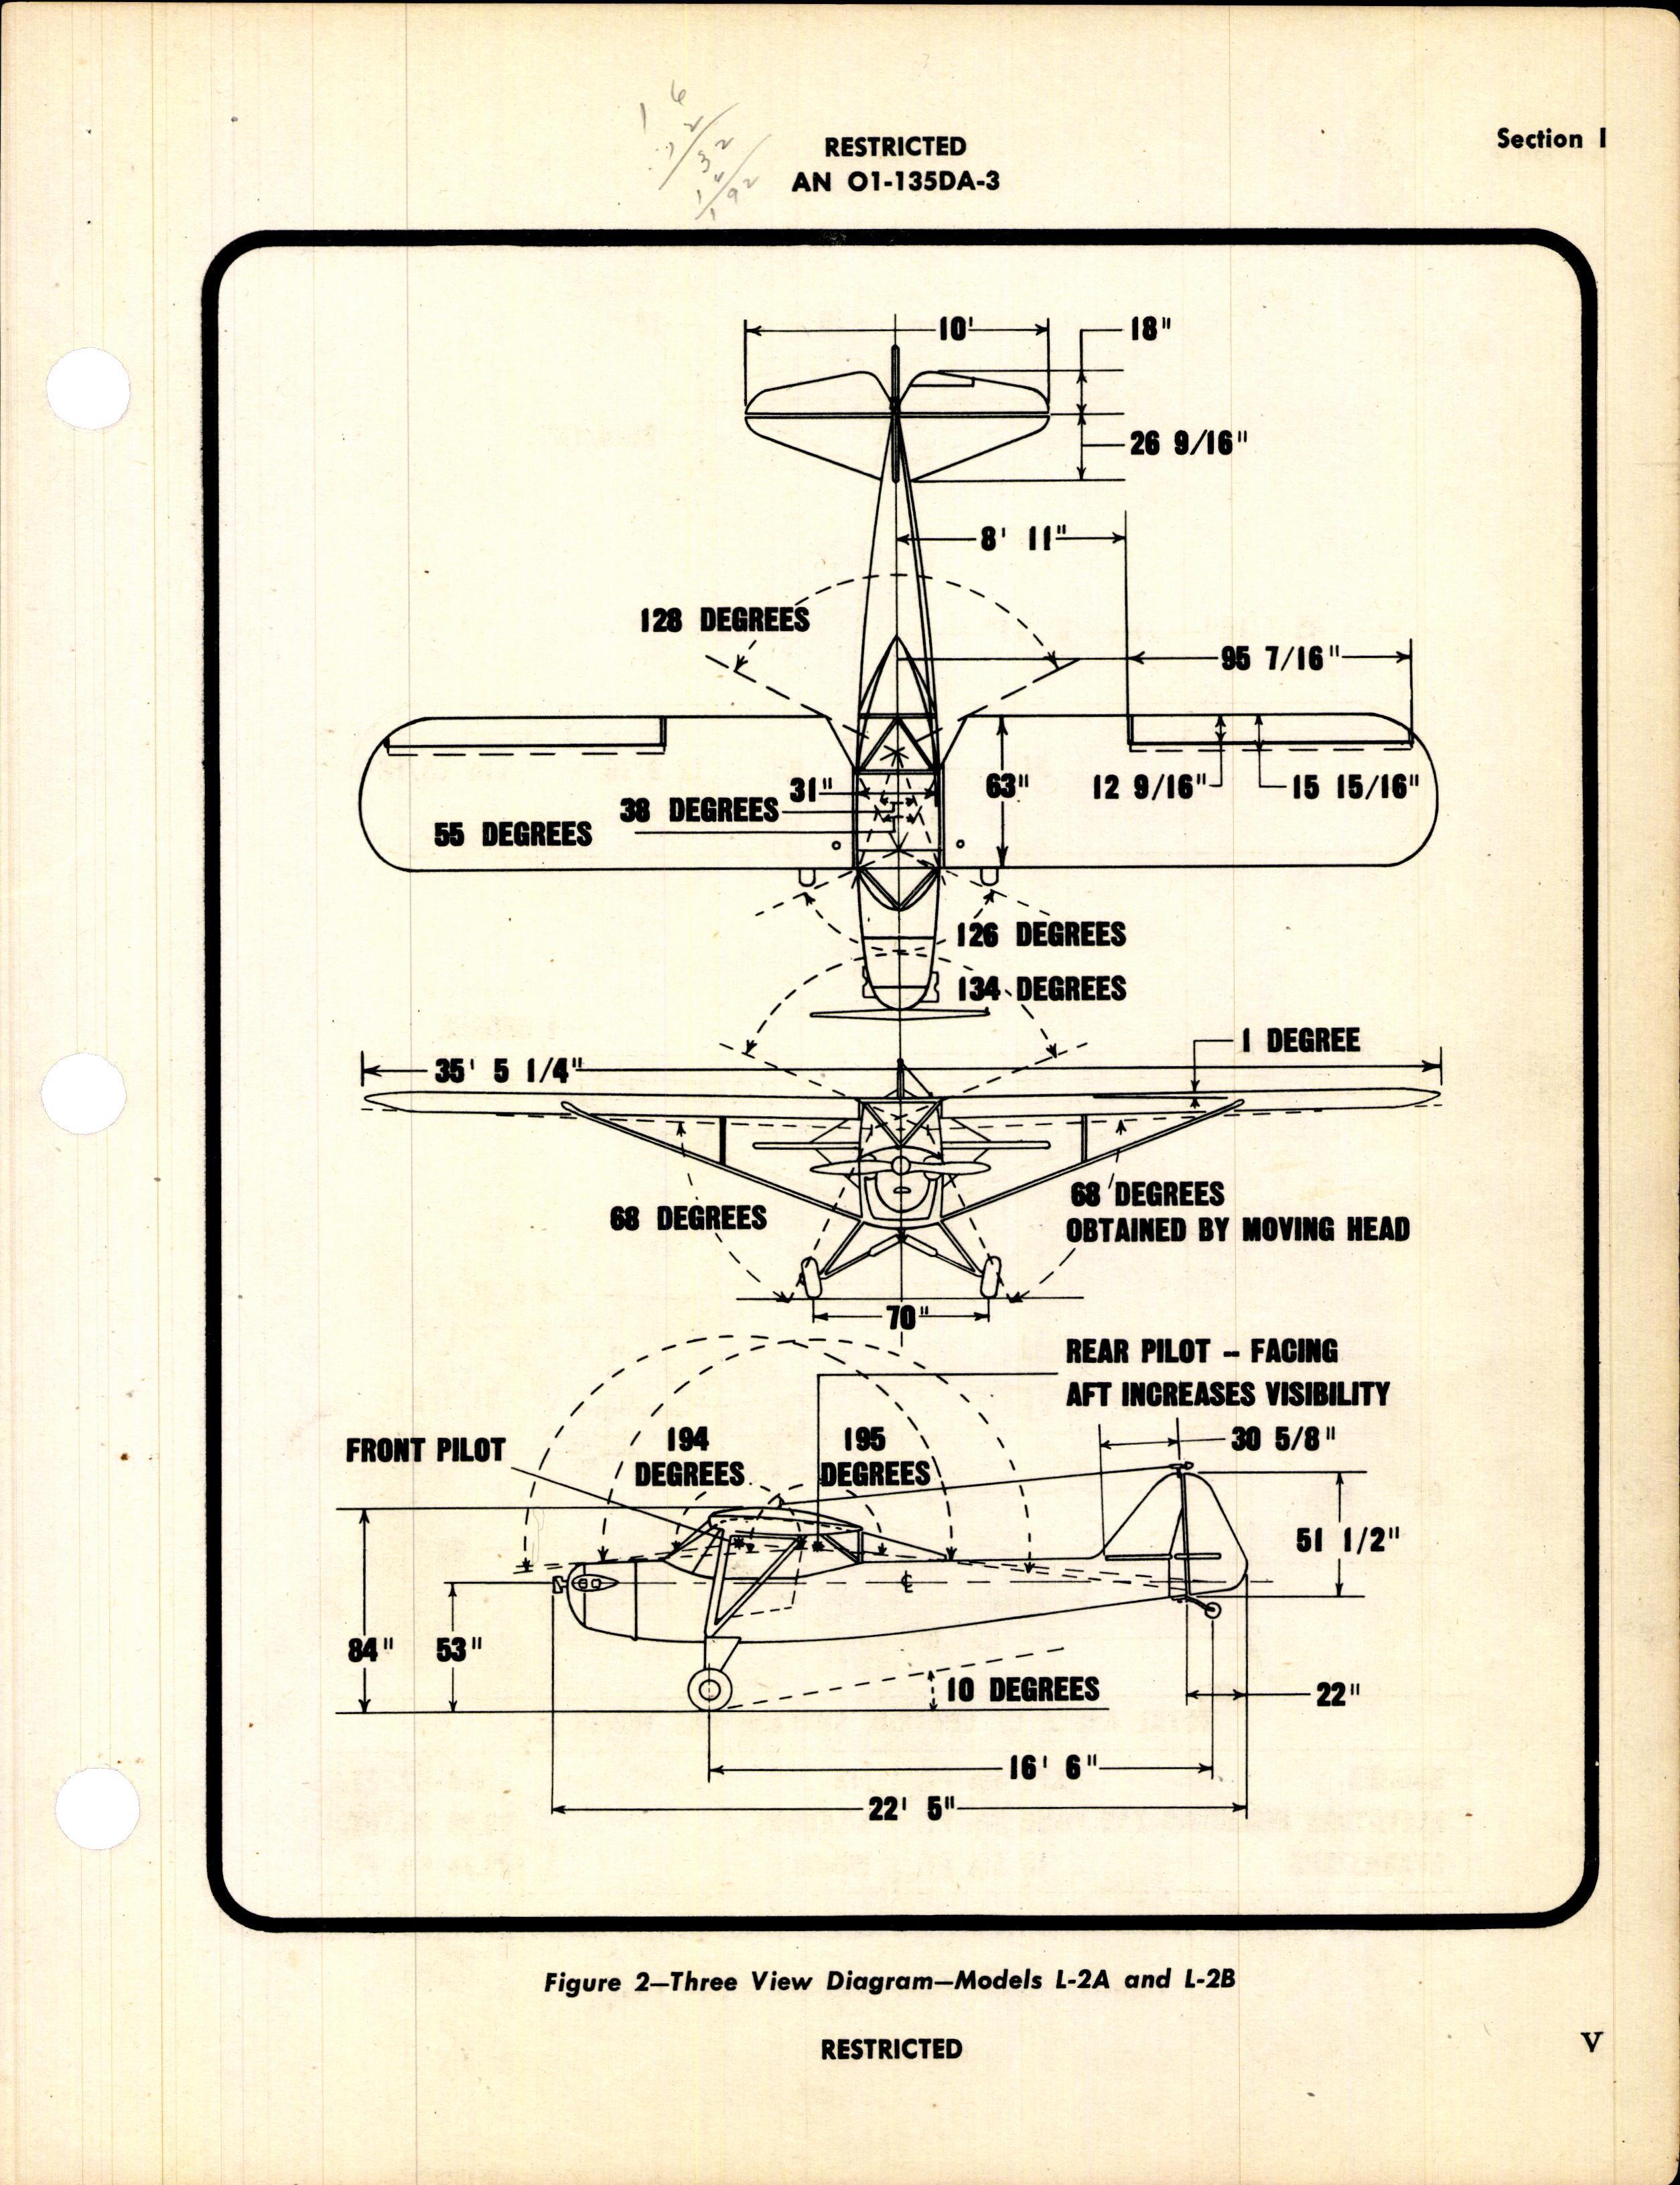 Sample page 7 from AirCorps Library document: Structural Repair Instructions for L-2, L-2A, and L-2B Airplanes